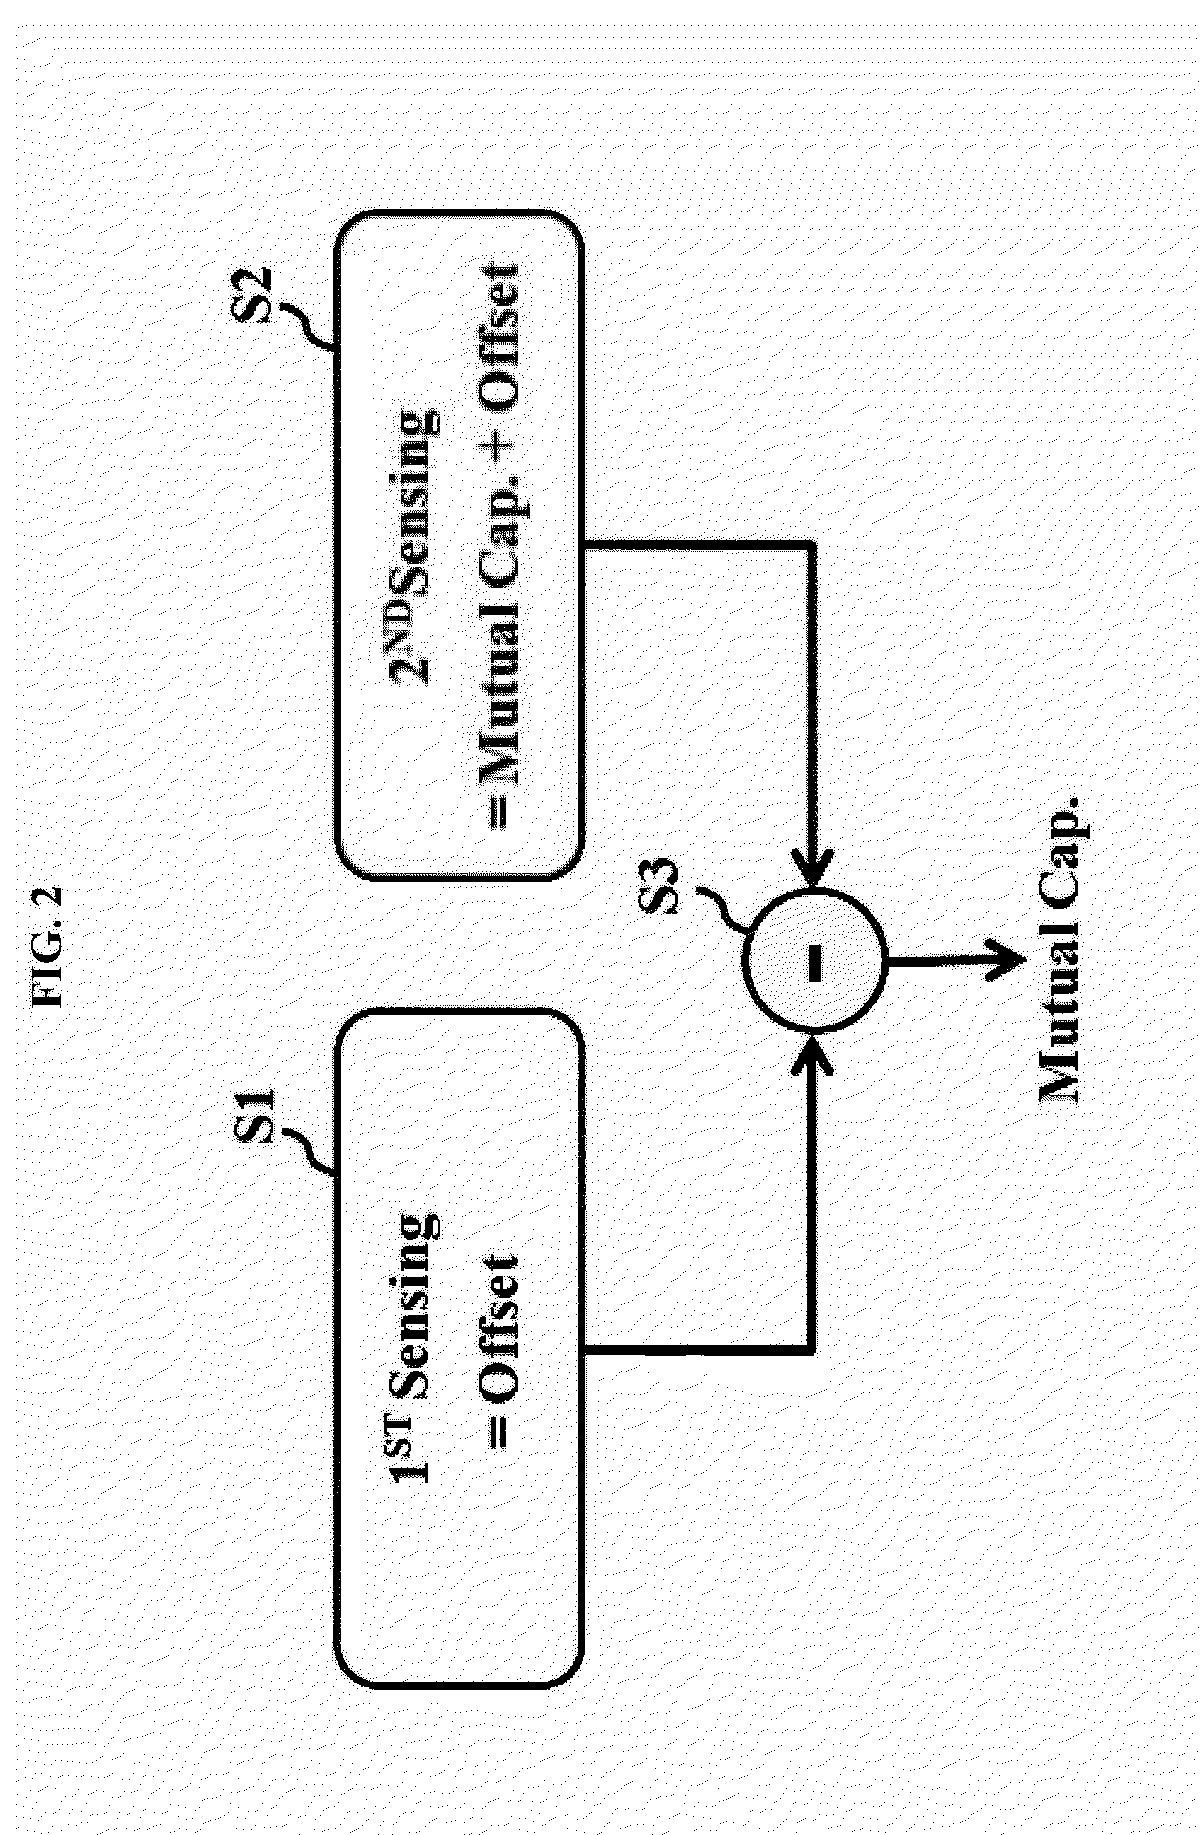 Touch sensing apparatus and method